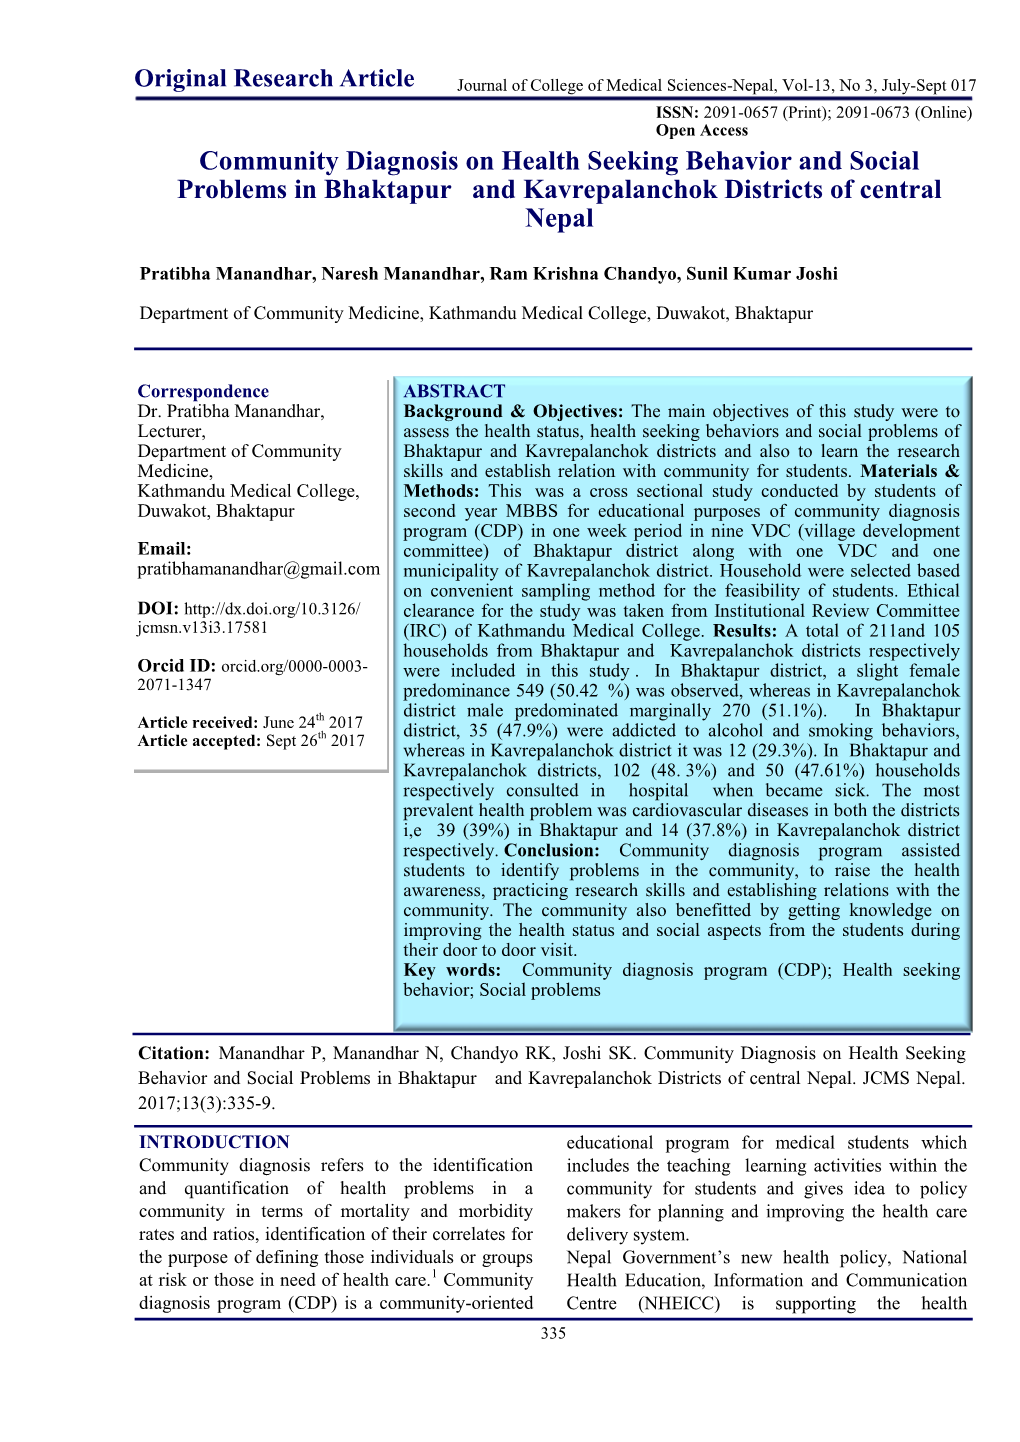 Community Diagnosis on Health Seeking Behavior and Social Problems in Bhaktapur and Kavrepalanchok Districts of Central Nepal